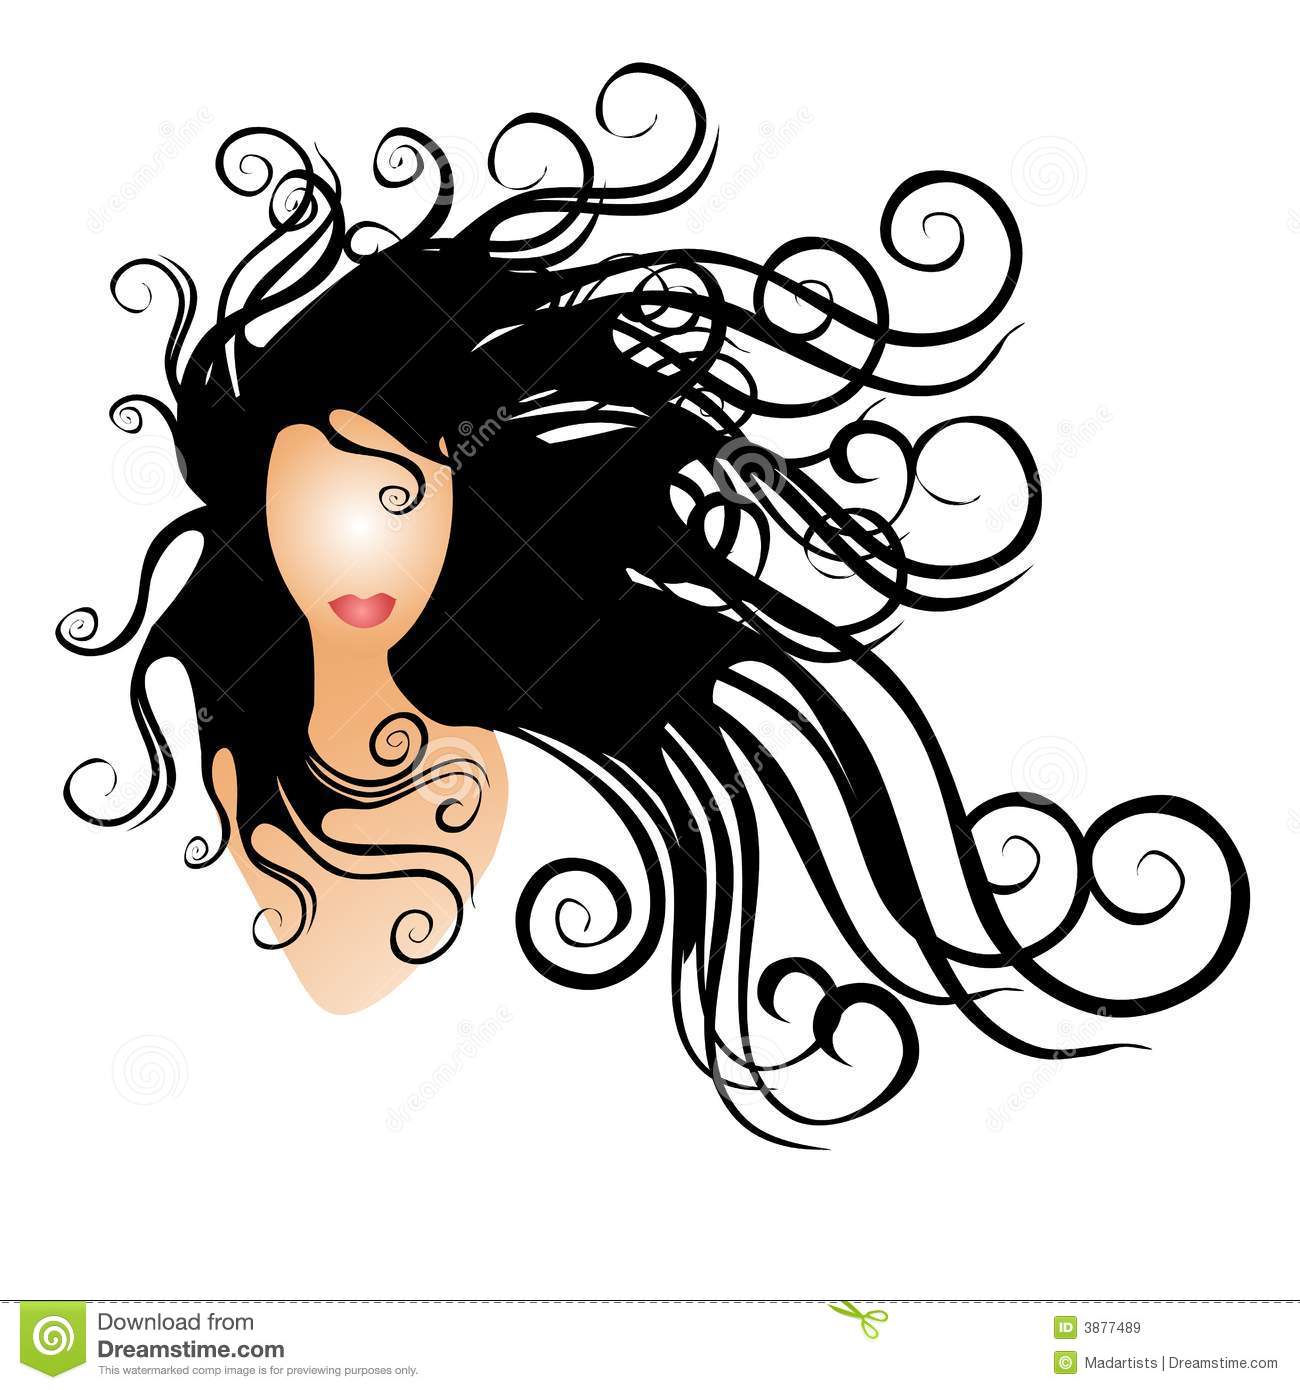 Clip Art Illustration Of A Woman With Long Black Flowing Hair